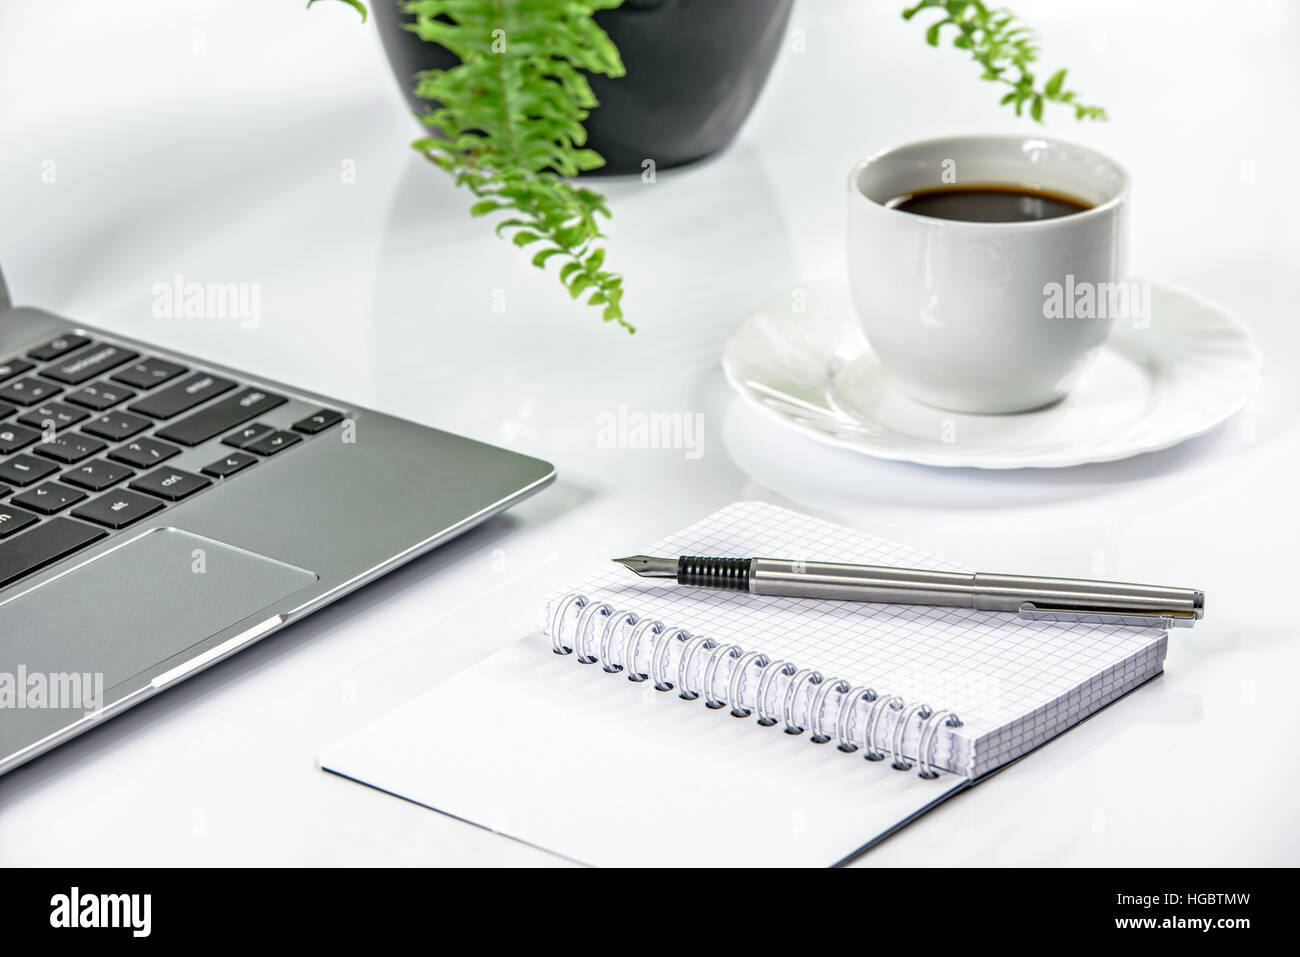 Sleek Metal Laptop And Pen With Notepad On A White Desk And Coffee